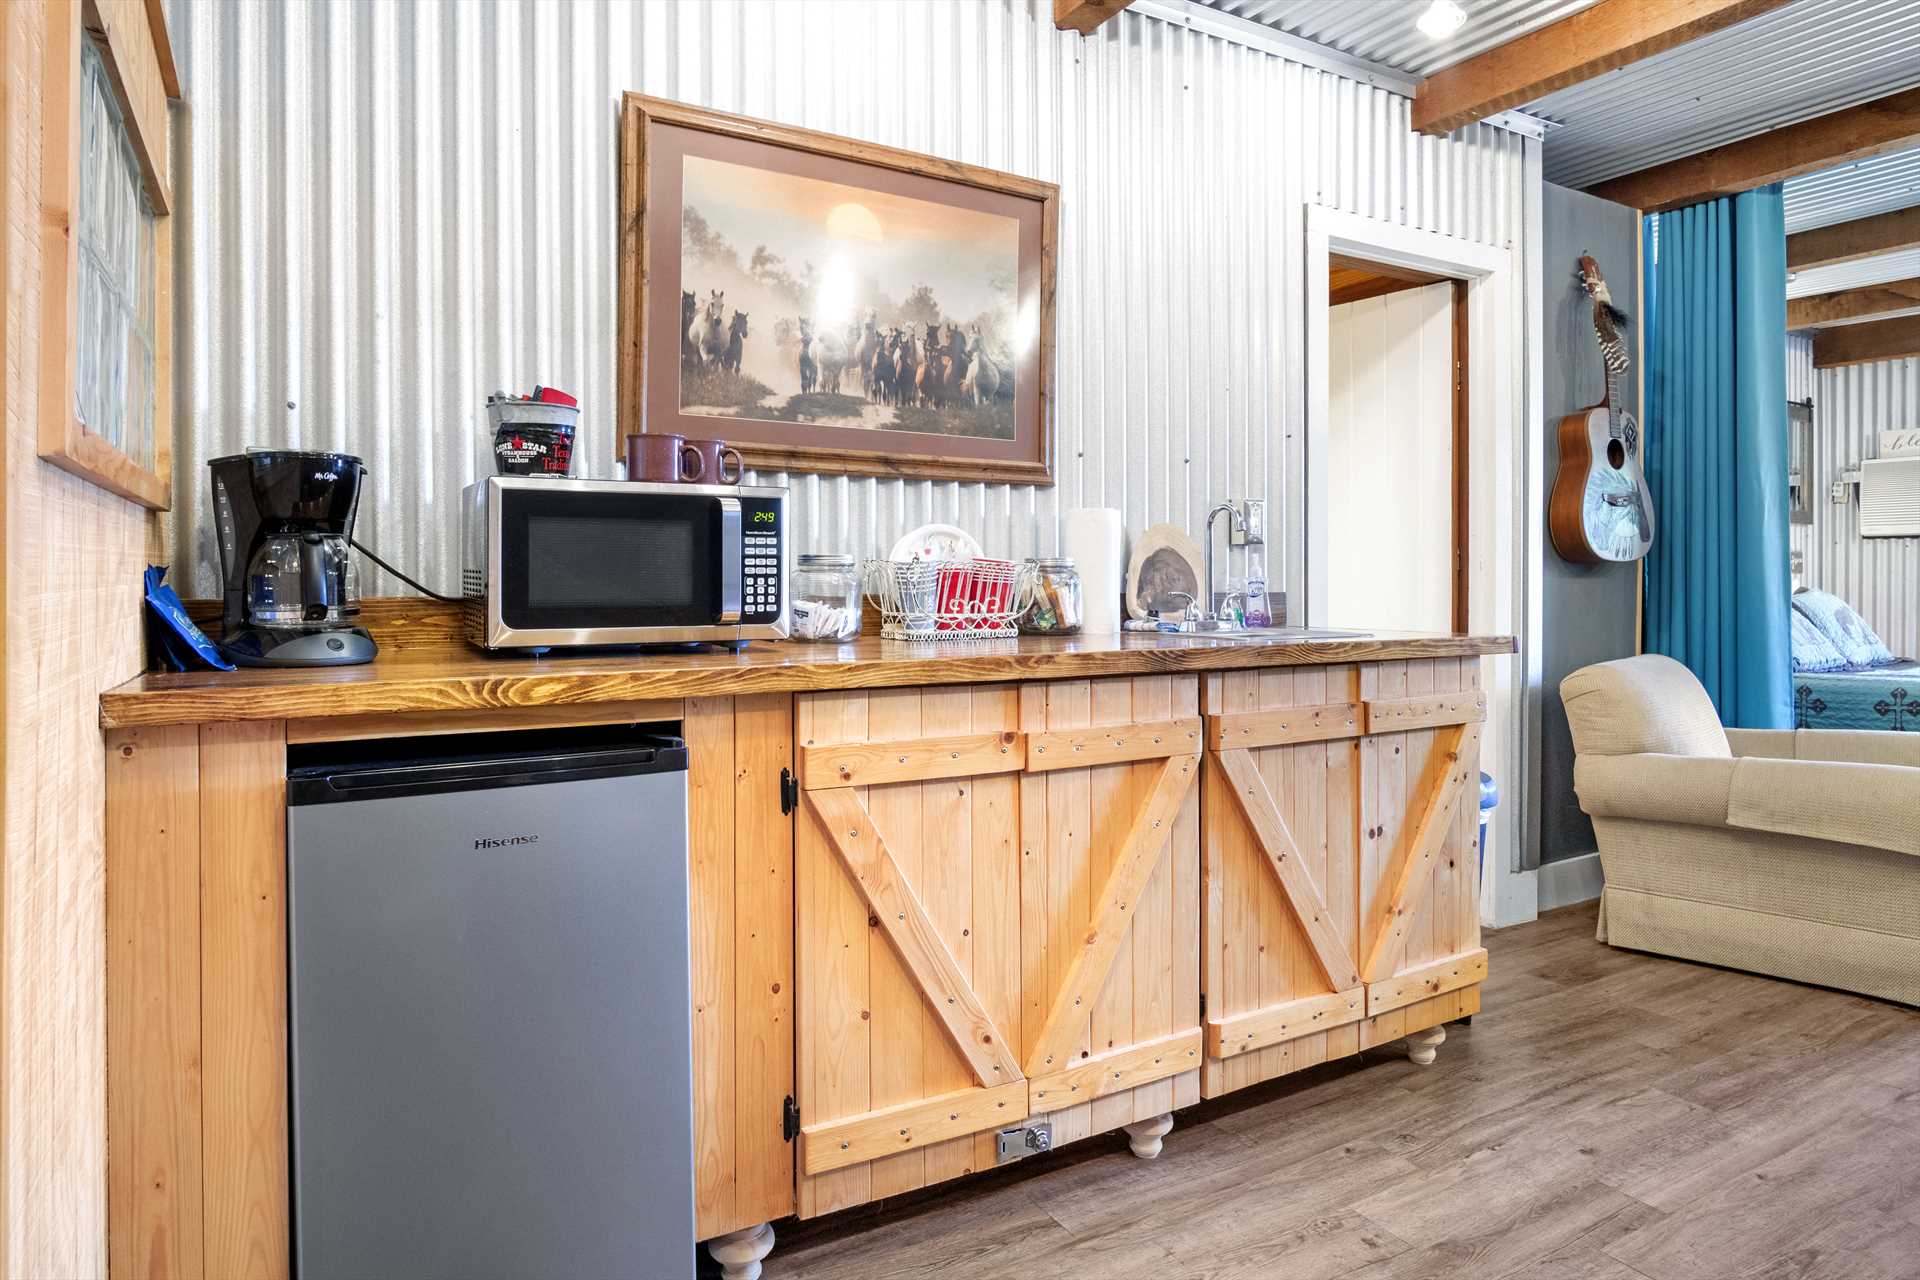                                                 The Hideaway Cabin's convenient kitchenette includes a mini fridge, microwave, and coffee maker.